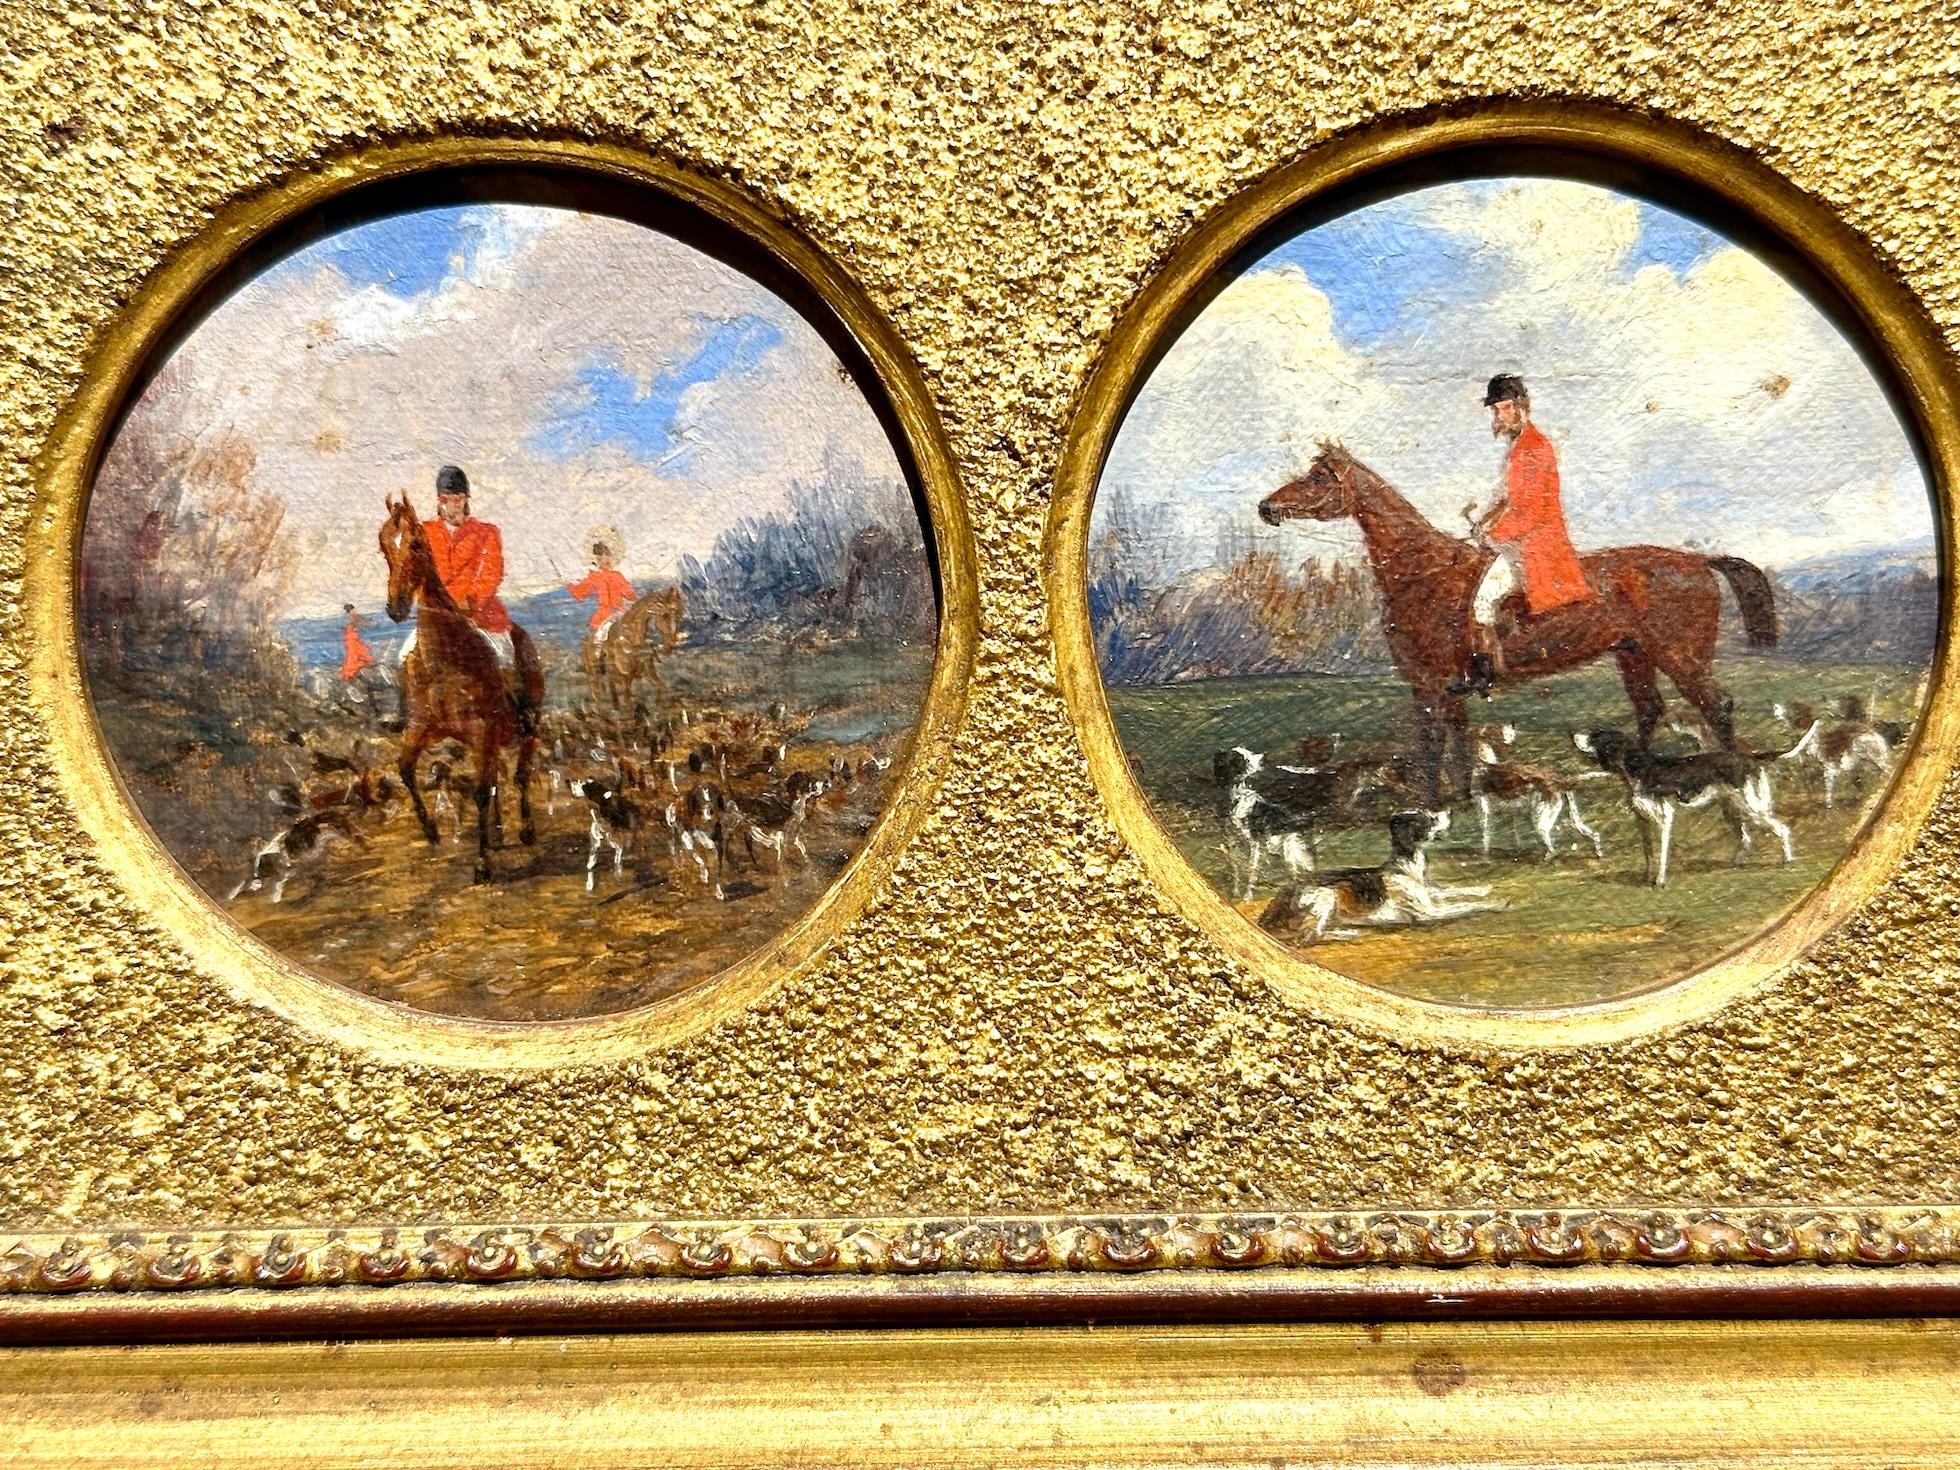 Antique 19th century English, pair of Huntsman riding with hounds in a landscape - Painting by John Frederick Herring Jr.